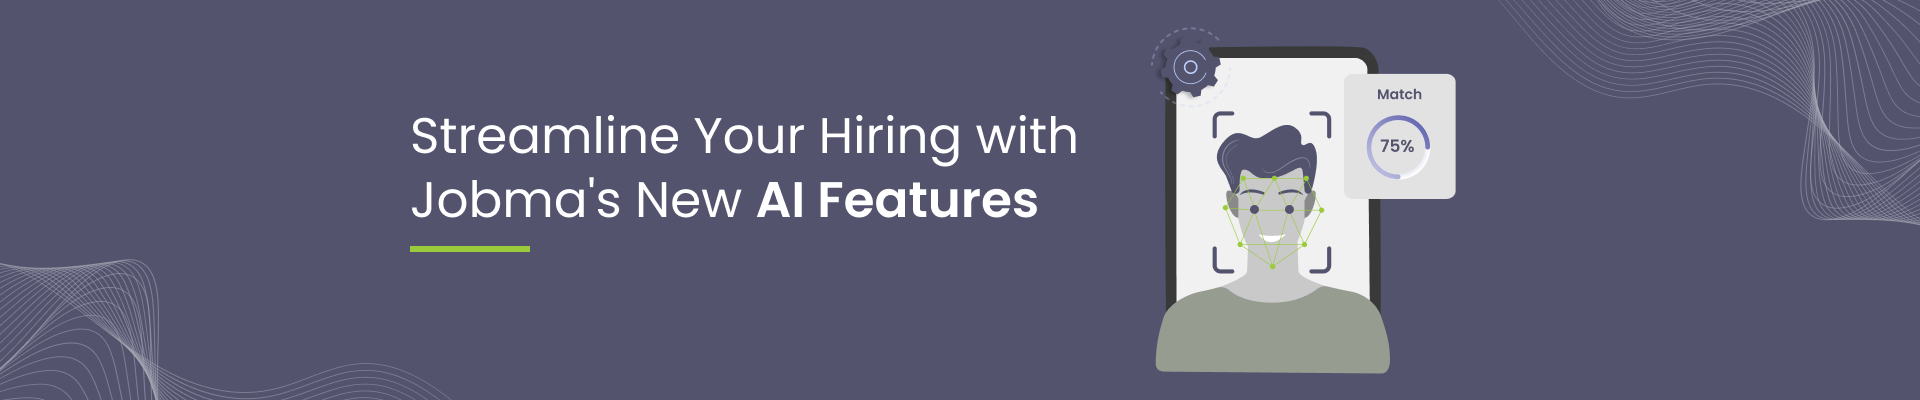 Streamline Your Hiring with Jobma's New AI Features